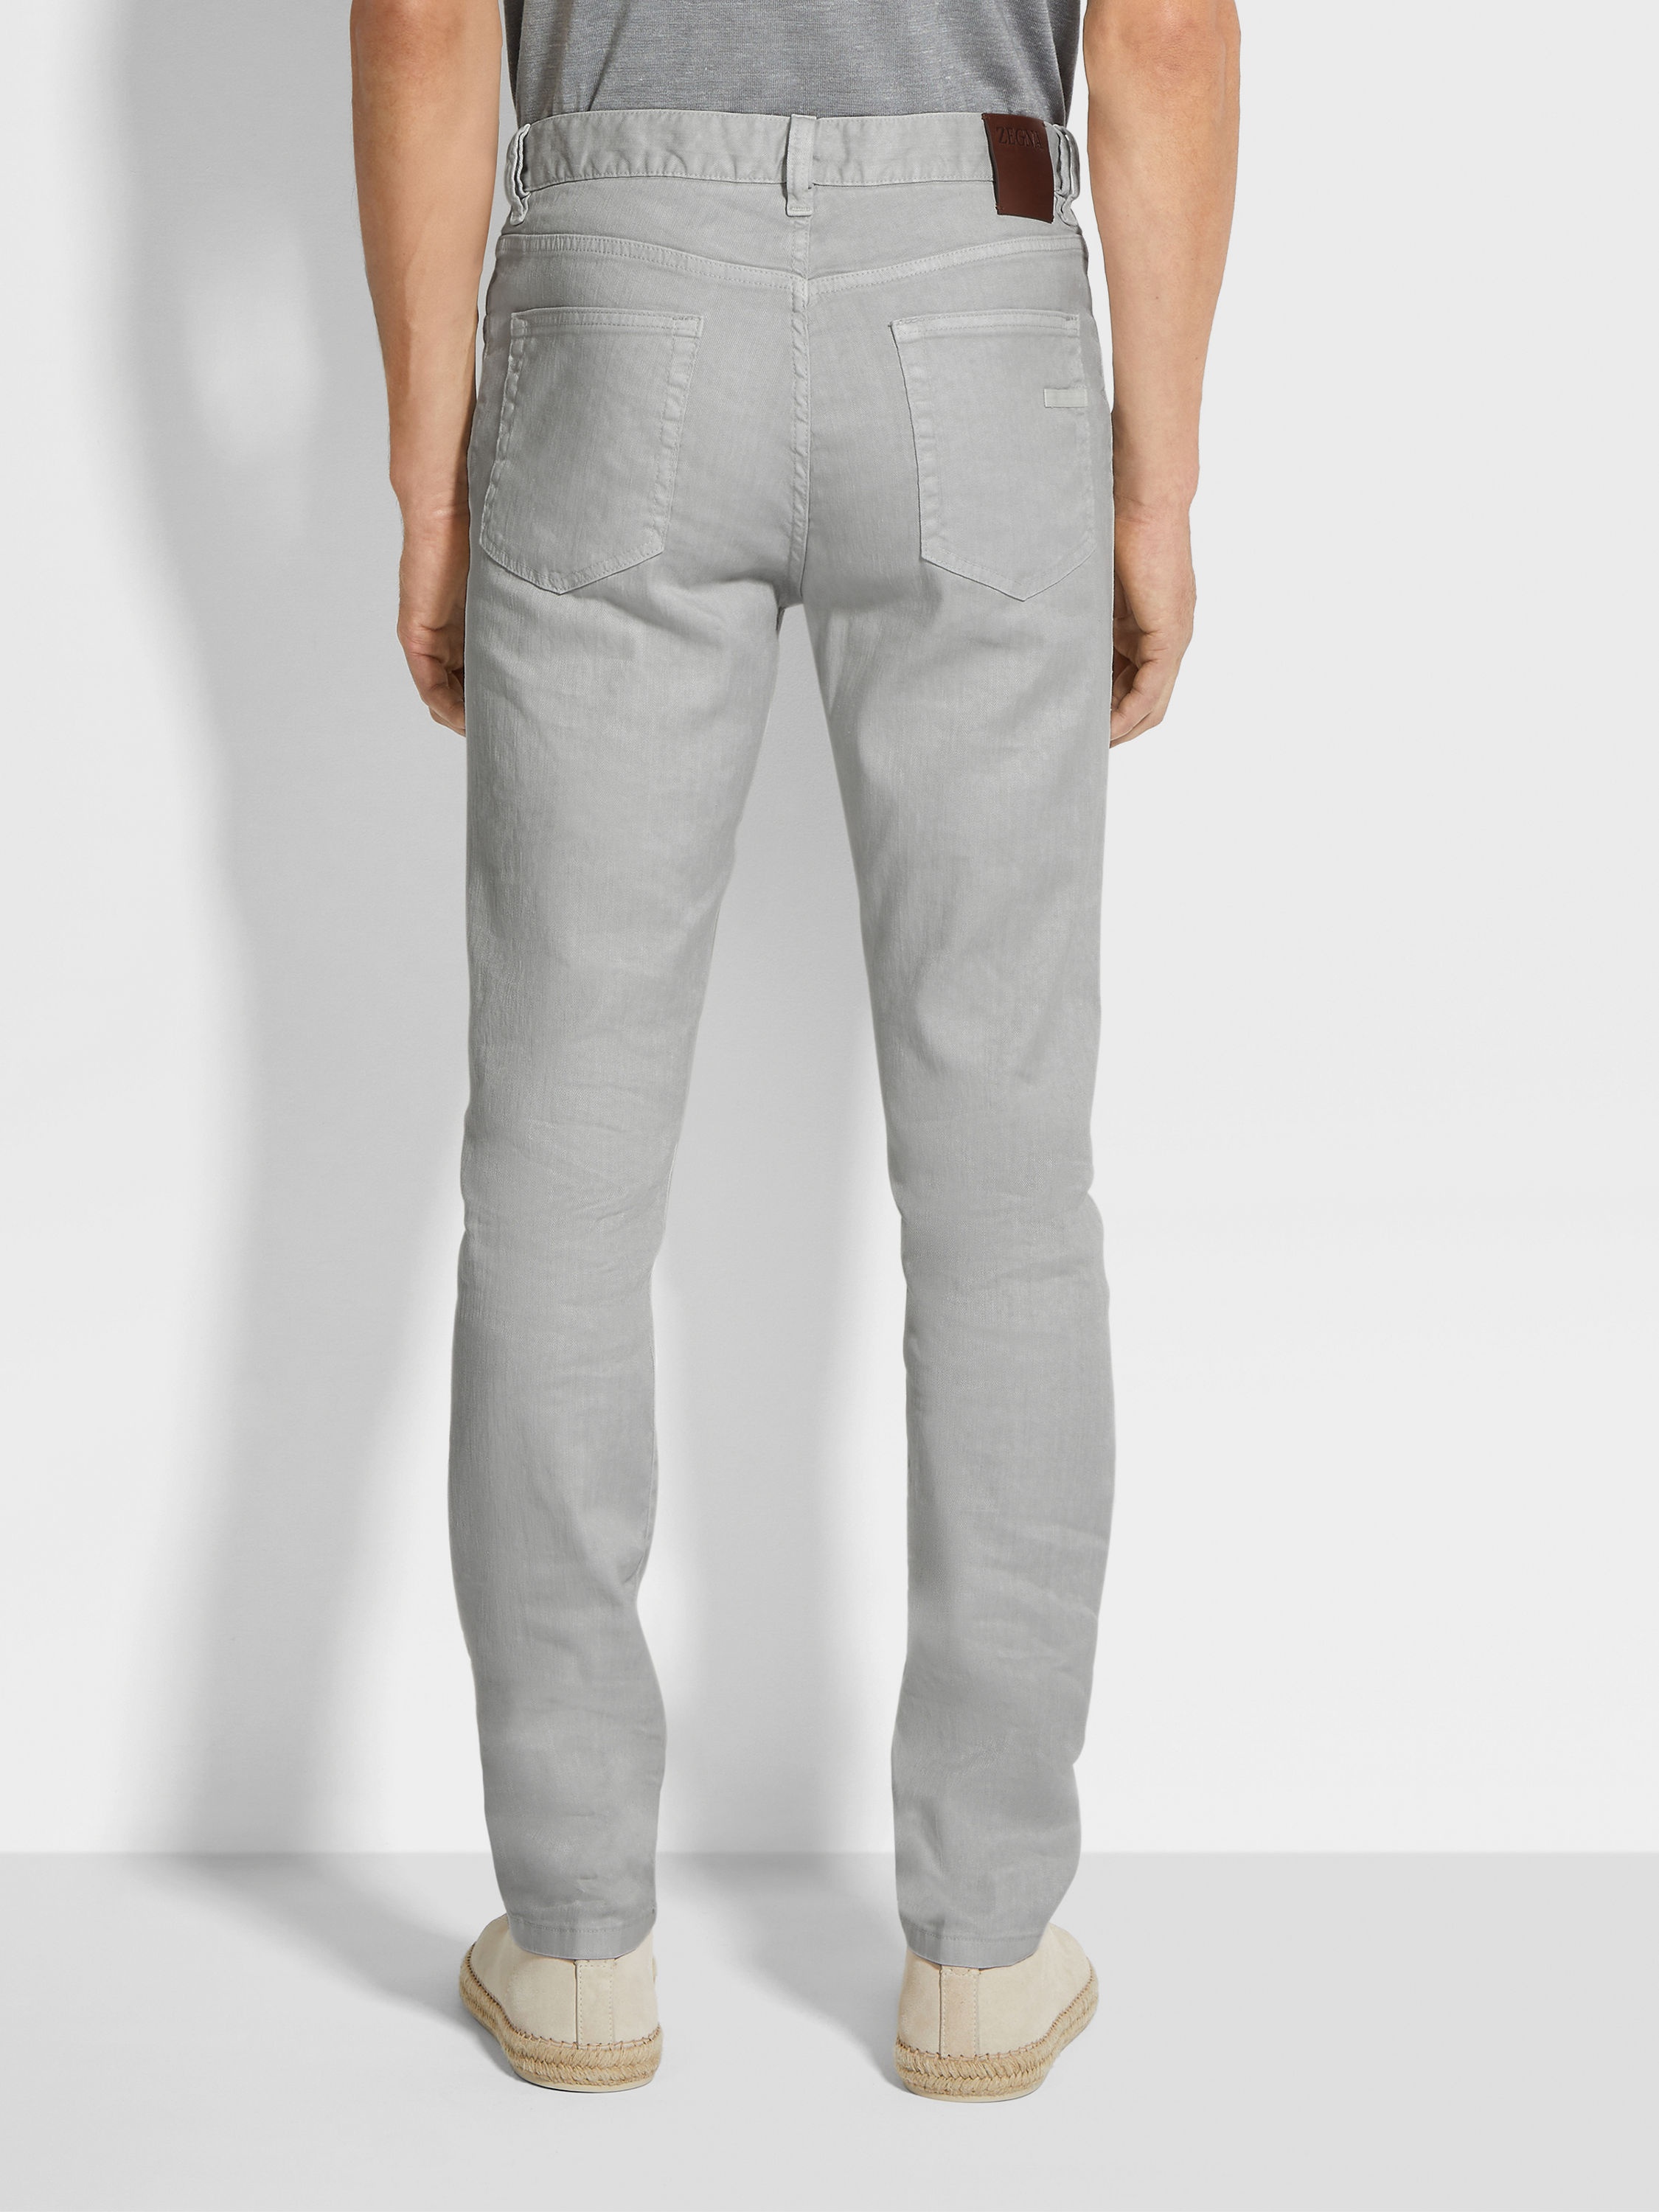 LIGHT GREY STRETCH LINEN AND COTTON ROCCIA JEANS - 5